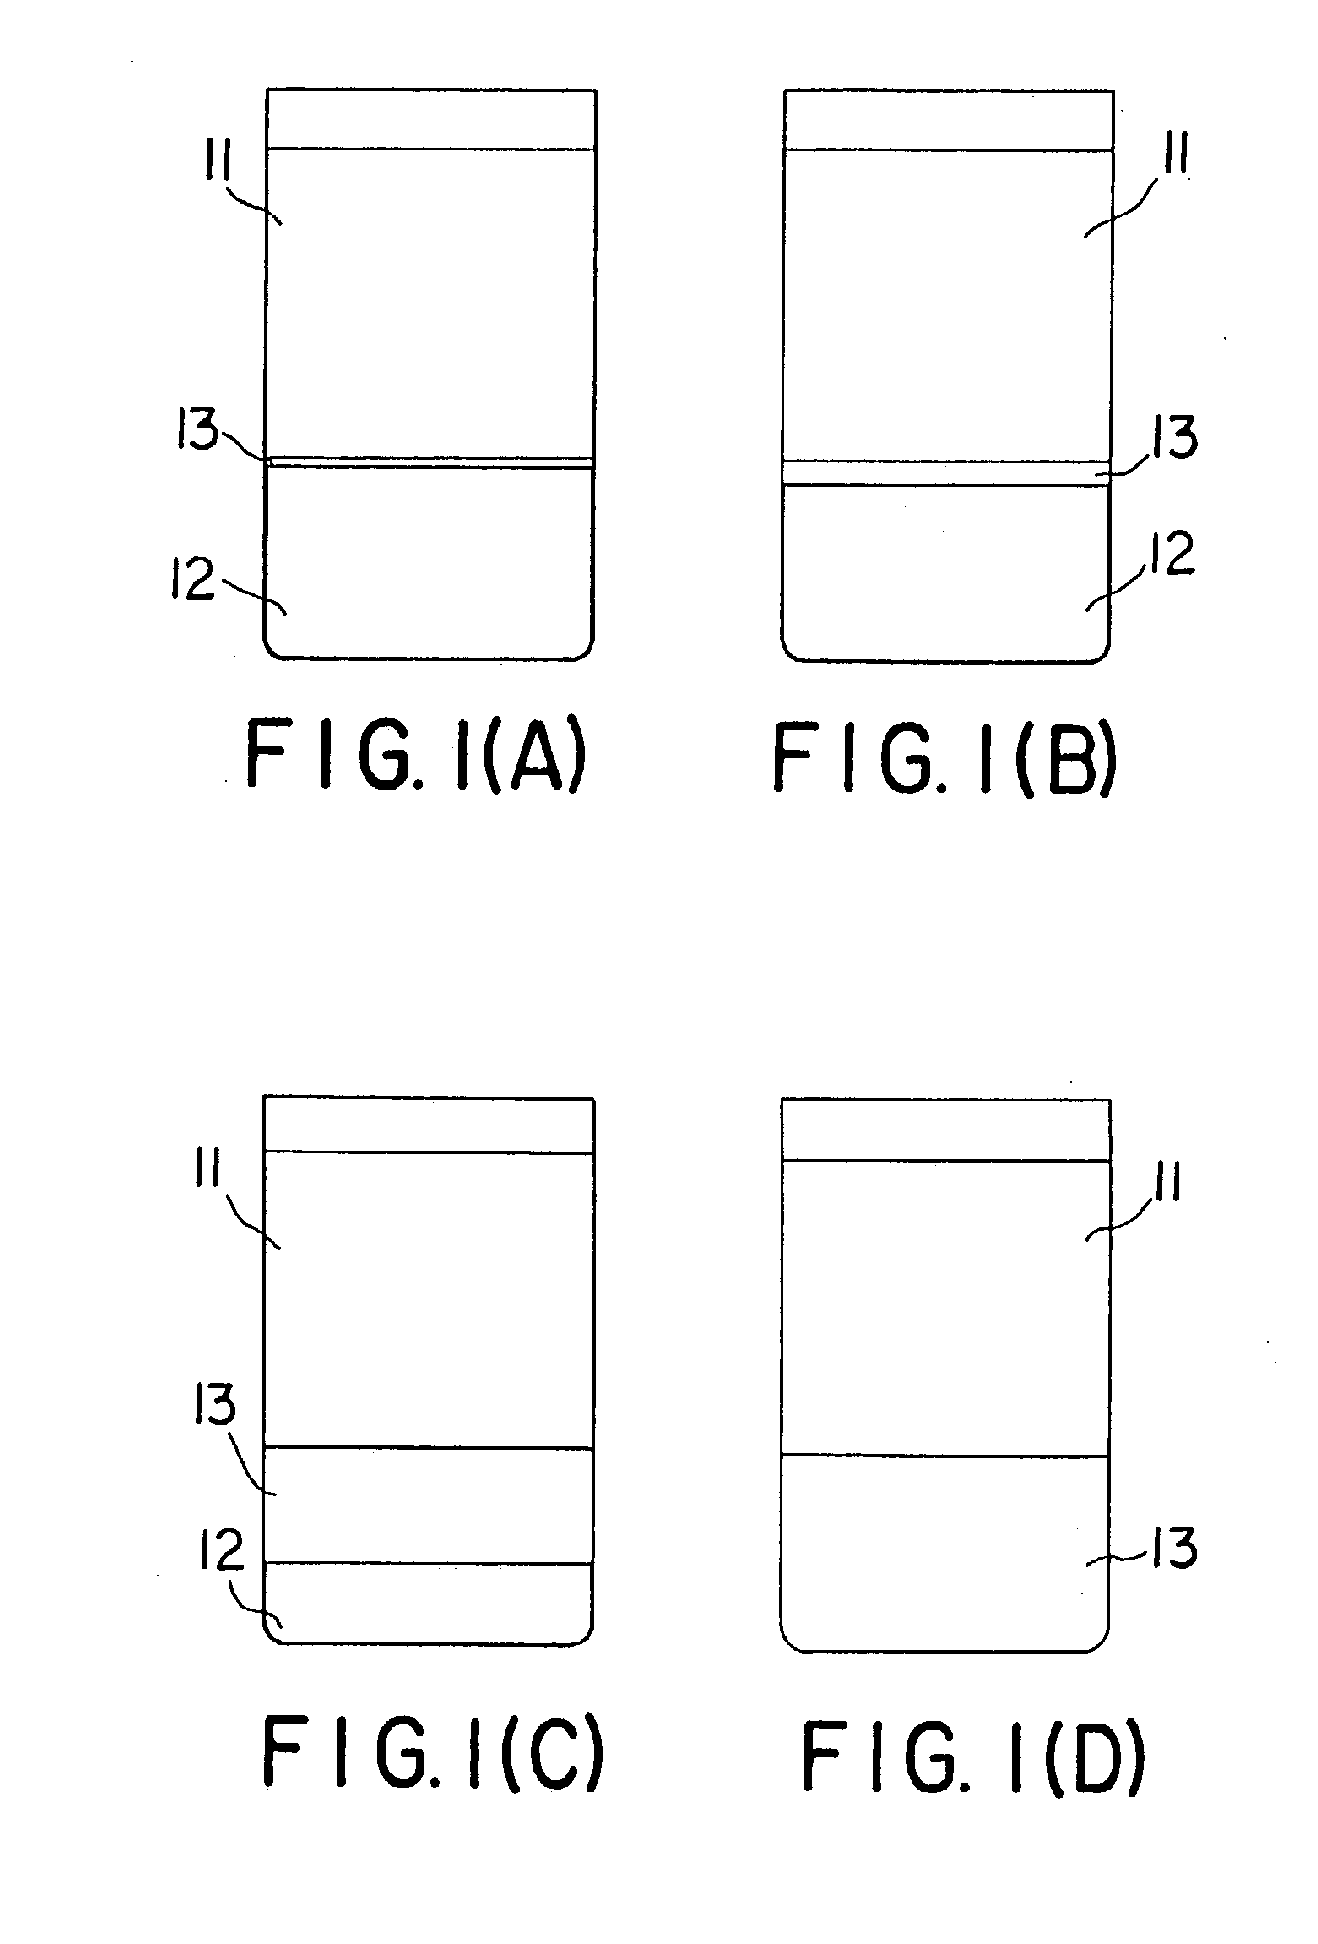 Materials and Methods For the Purification of Polyelectrolytes, Particularly Nucleic Acids